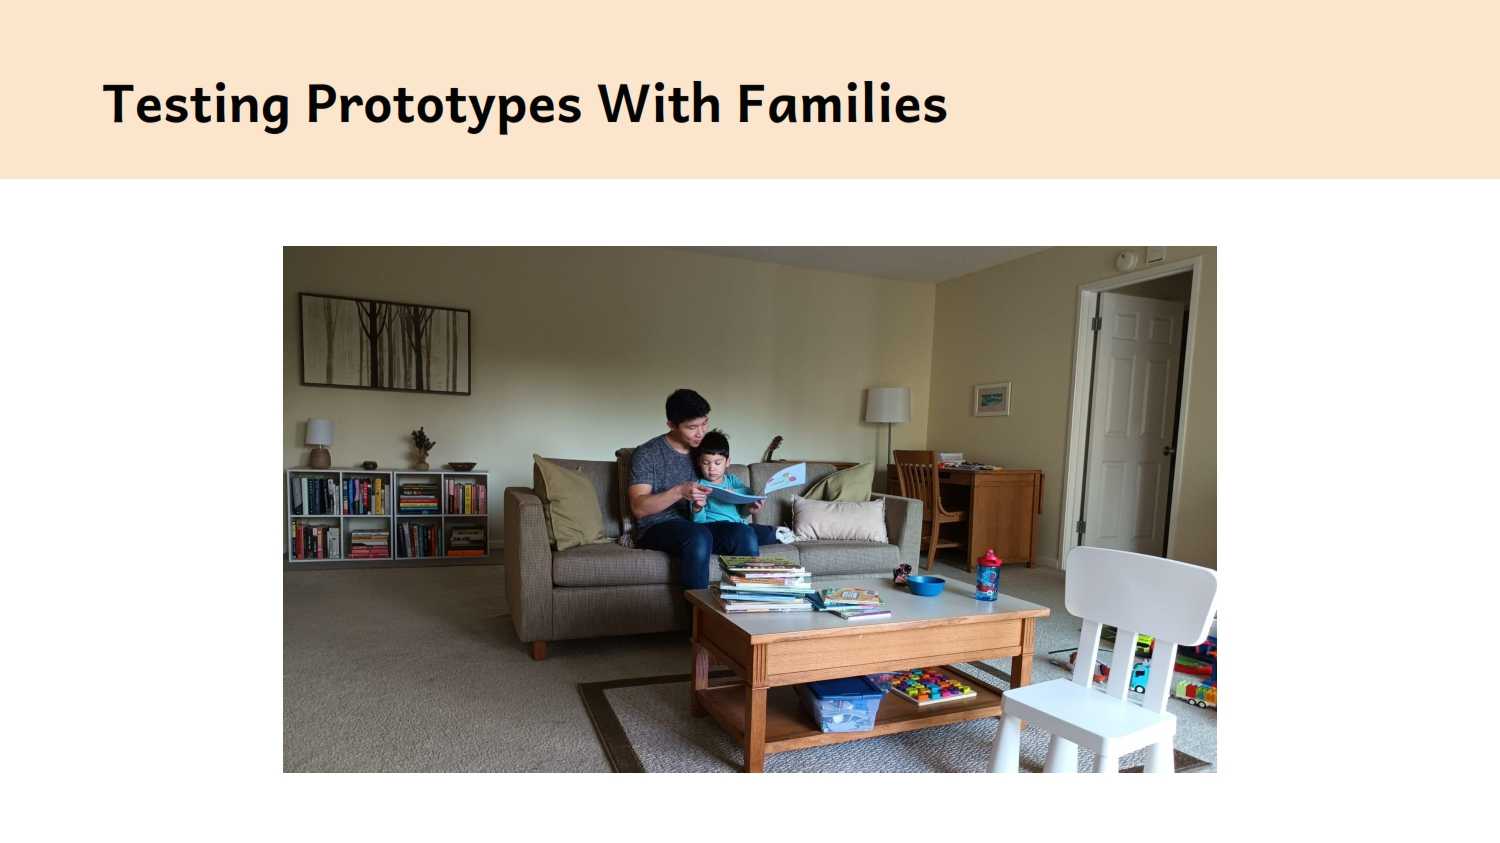 Testing prototypes with families